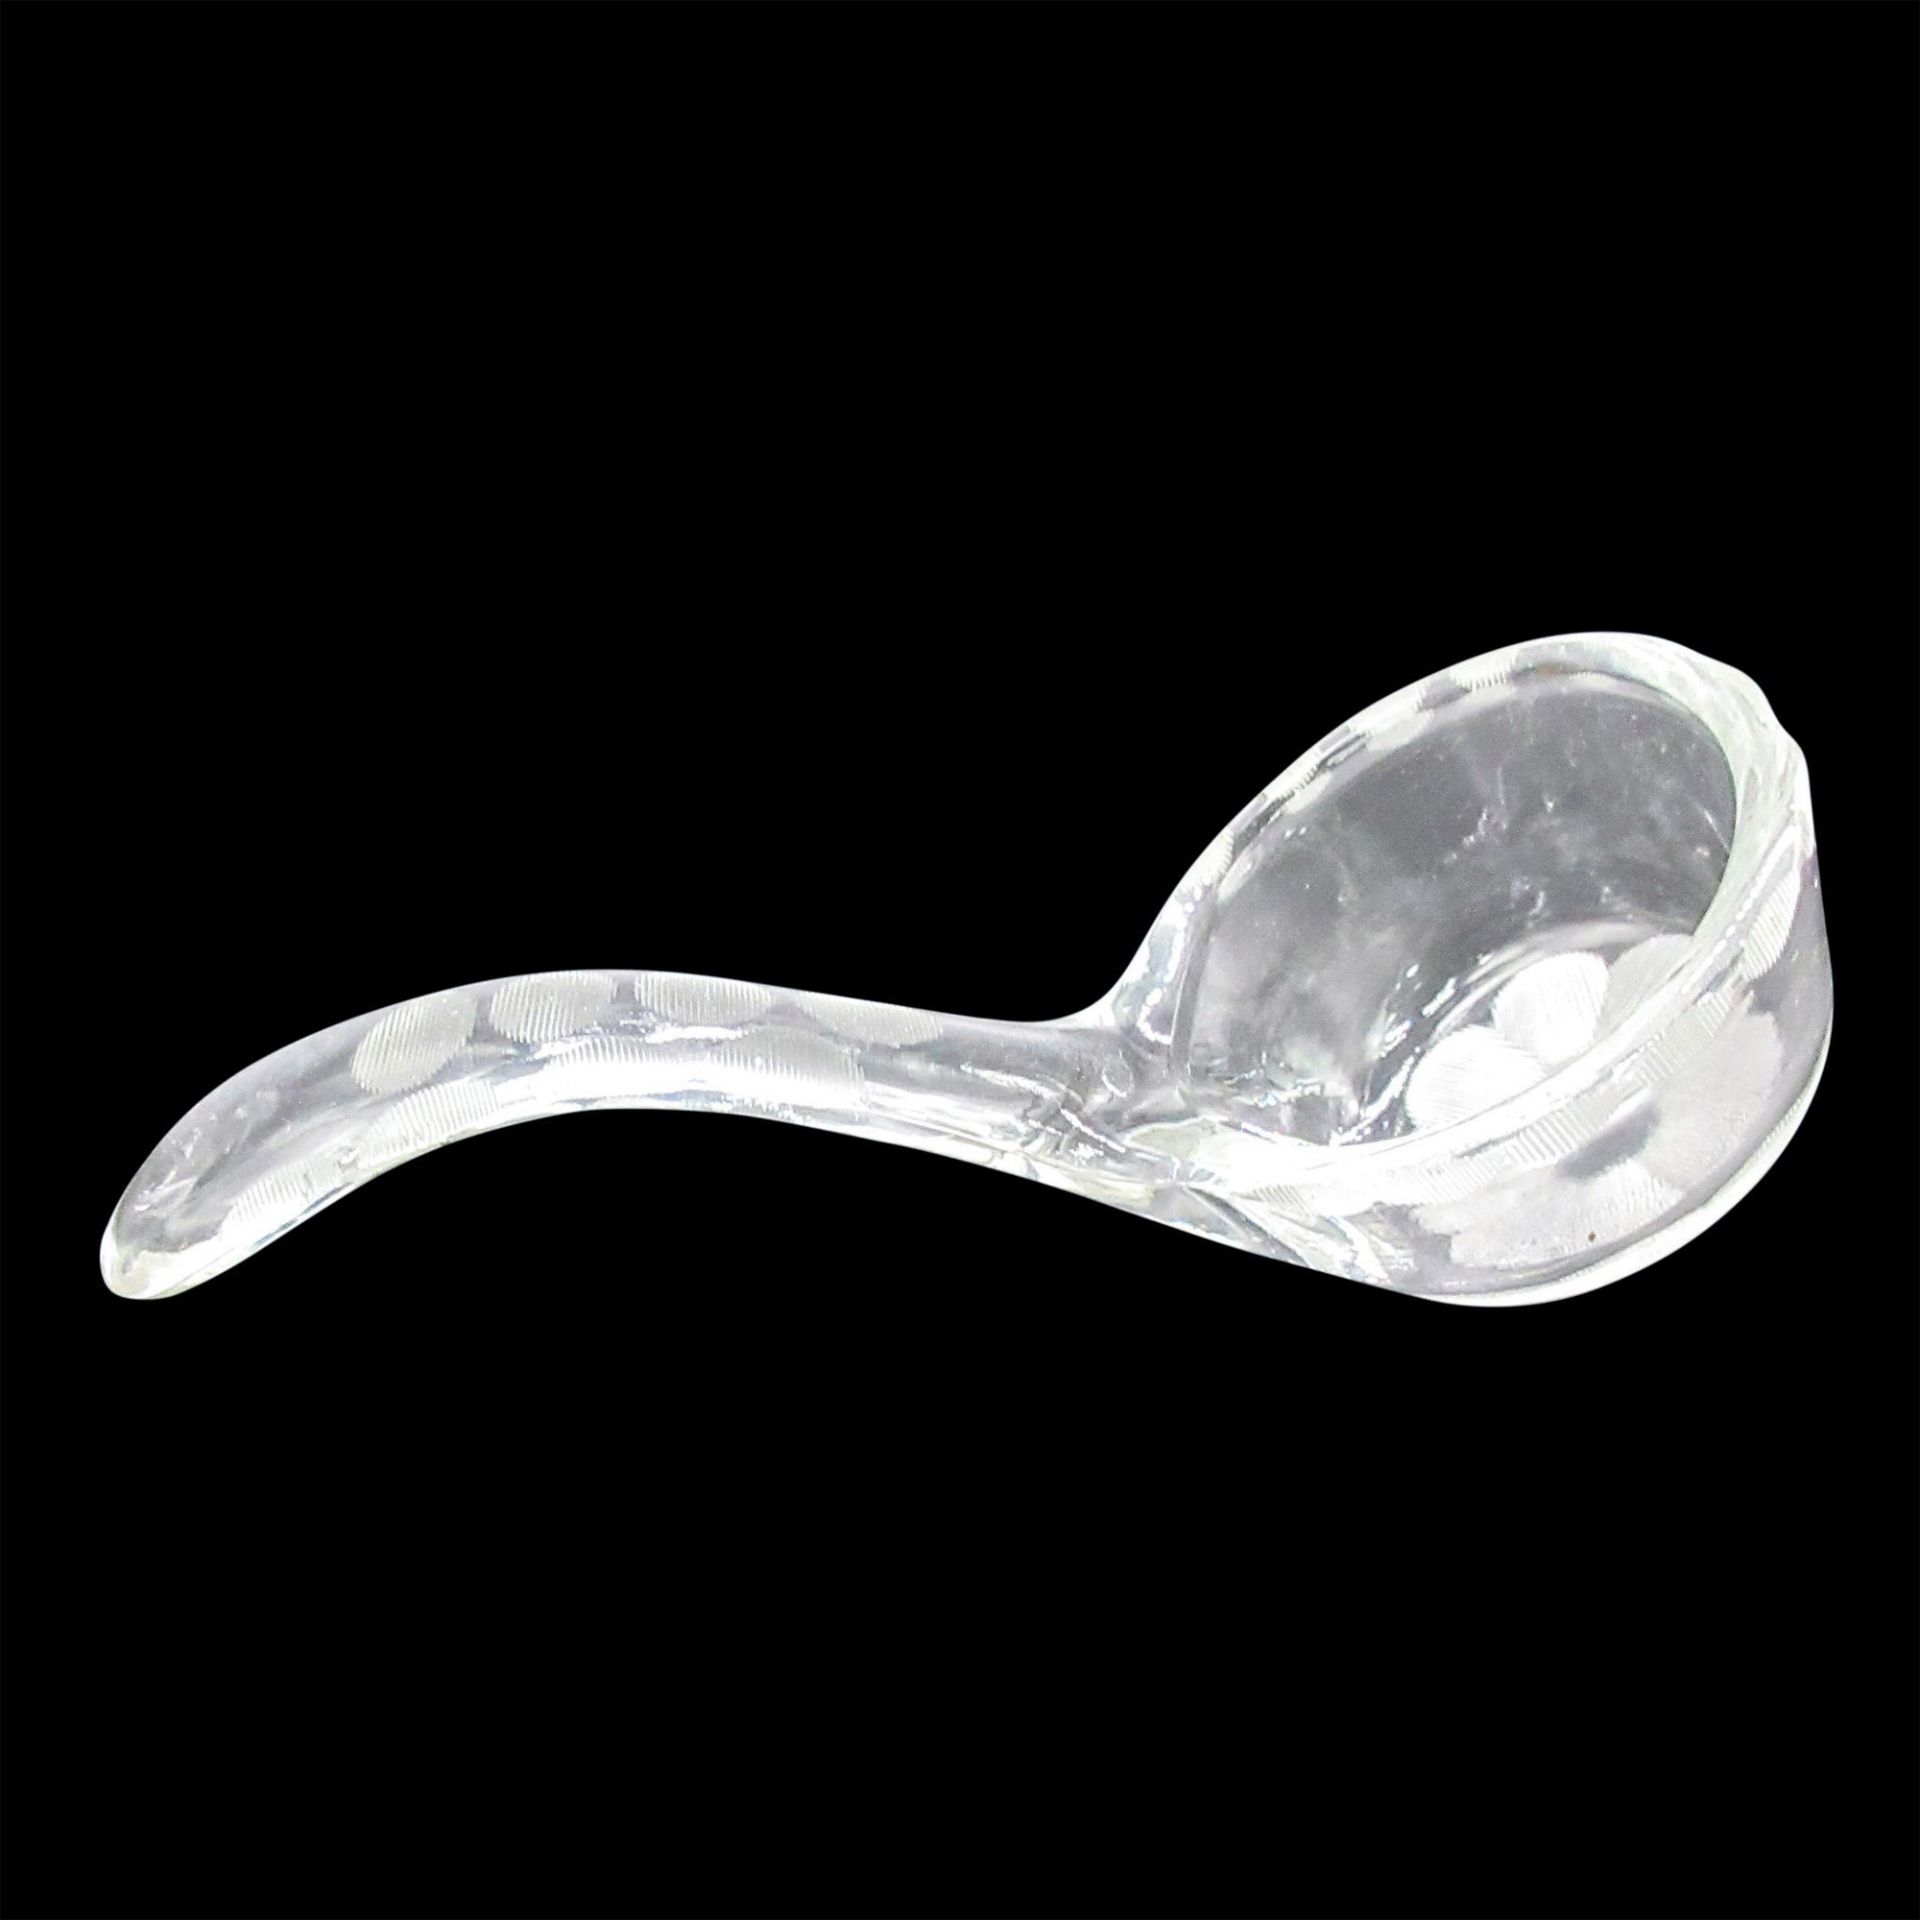 5pc Small Glass Ladles - Image 9 of 16